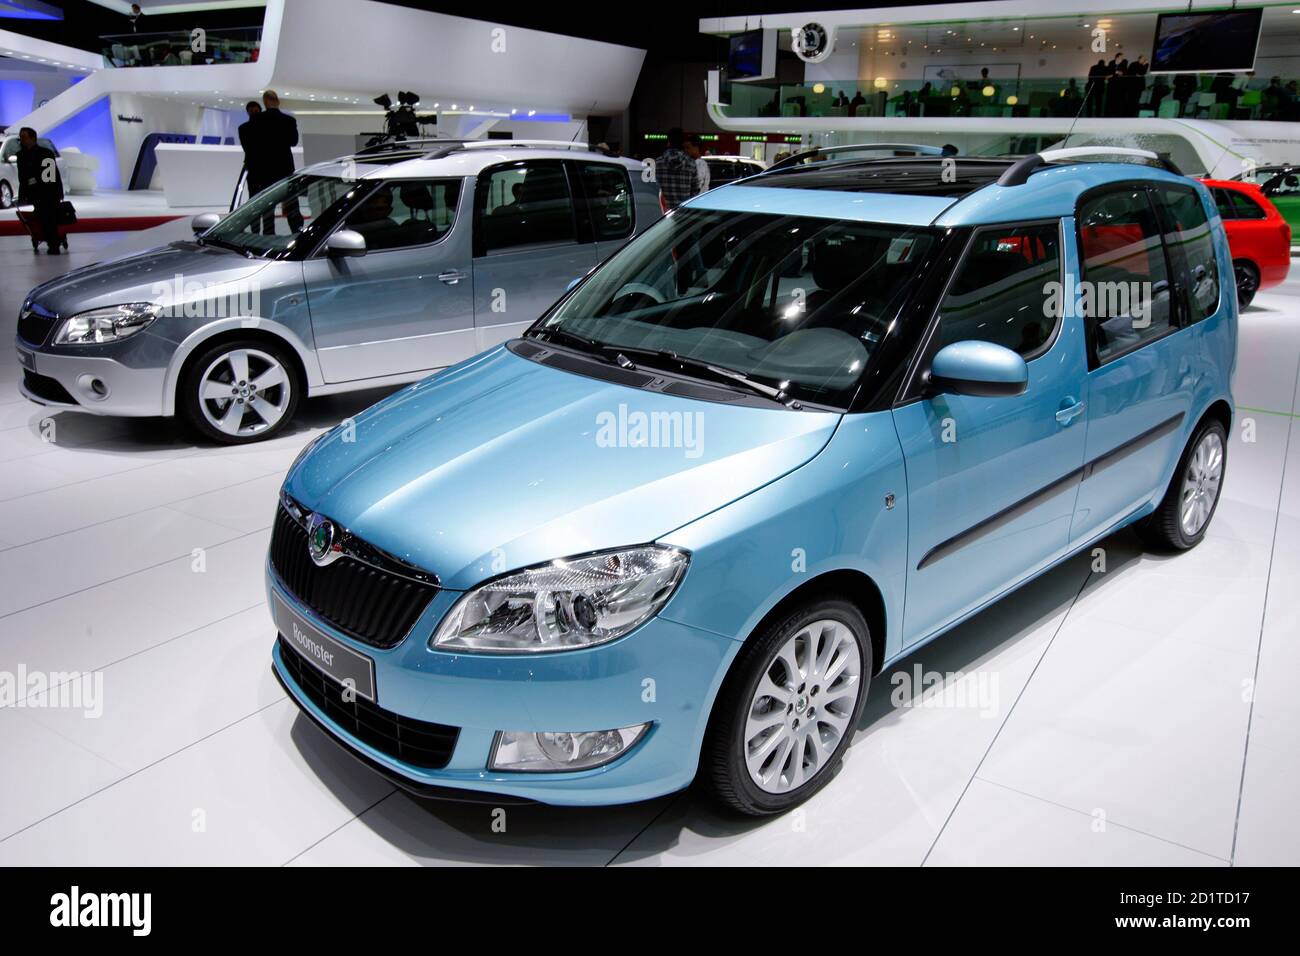 The new Skoda Roomster is displayed at the exhibition stand of Skoda during  the first media day of the 80th Geneva Car Show at the Palexpo in Geneva  March 2, 2010. REUTERS/Valentin